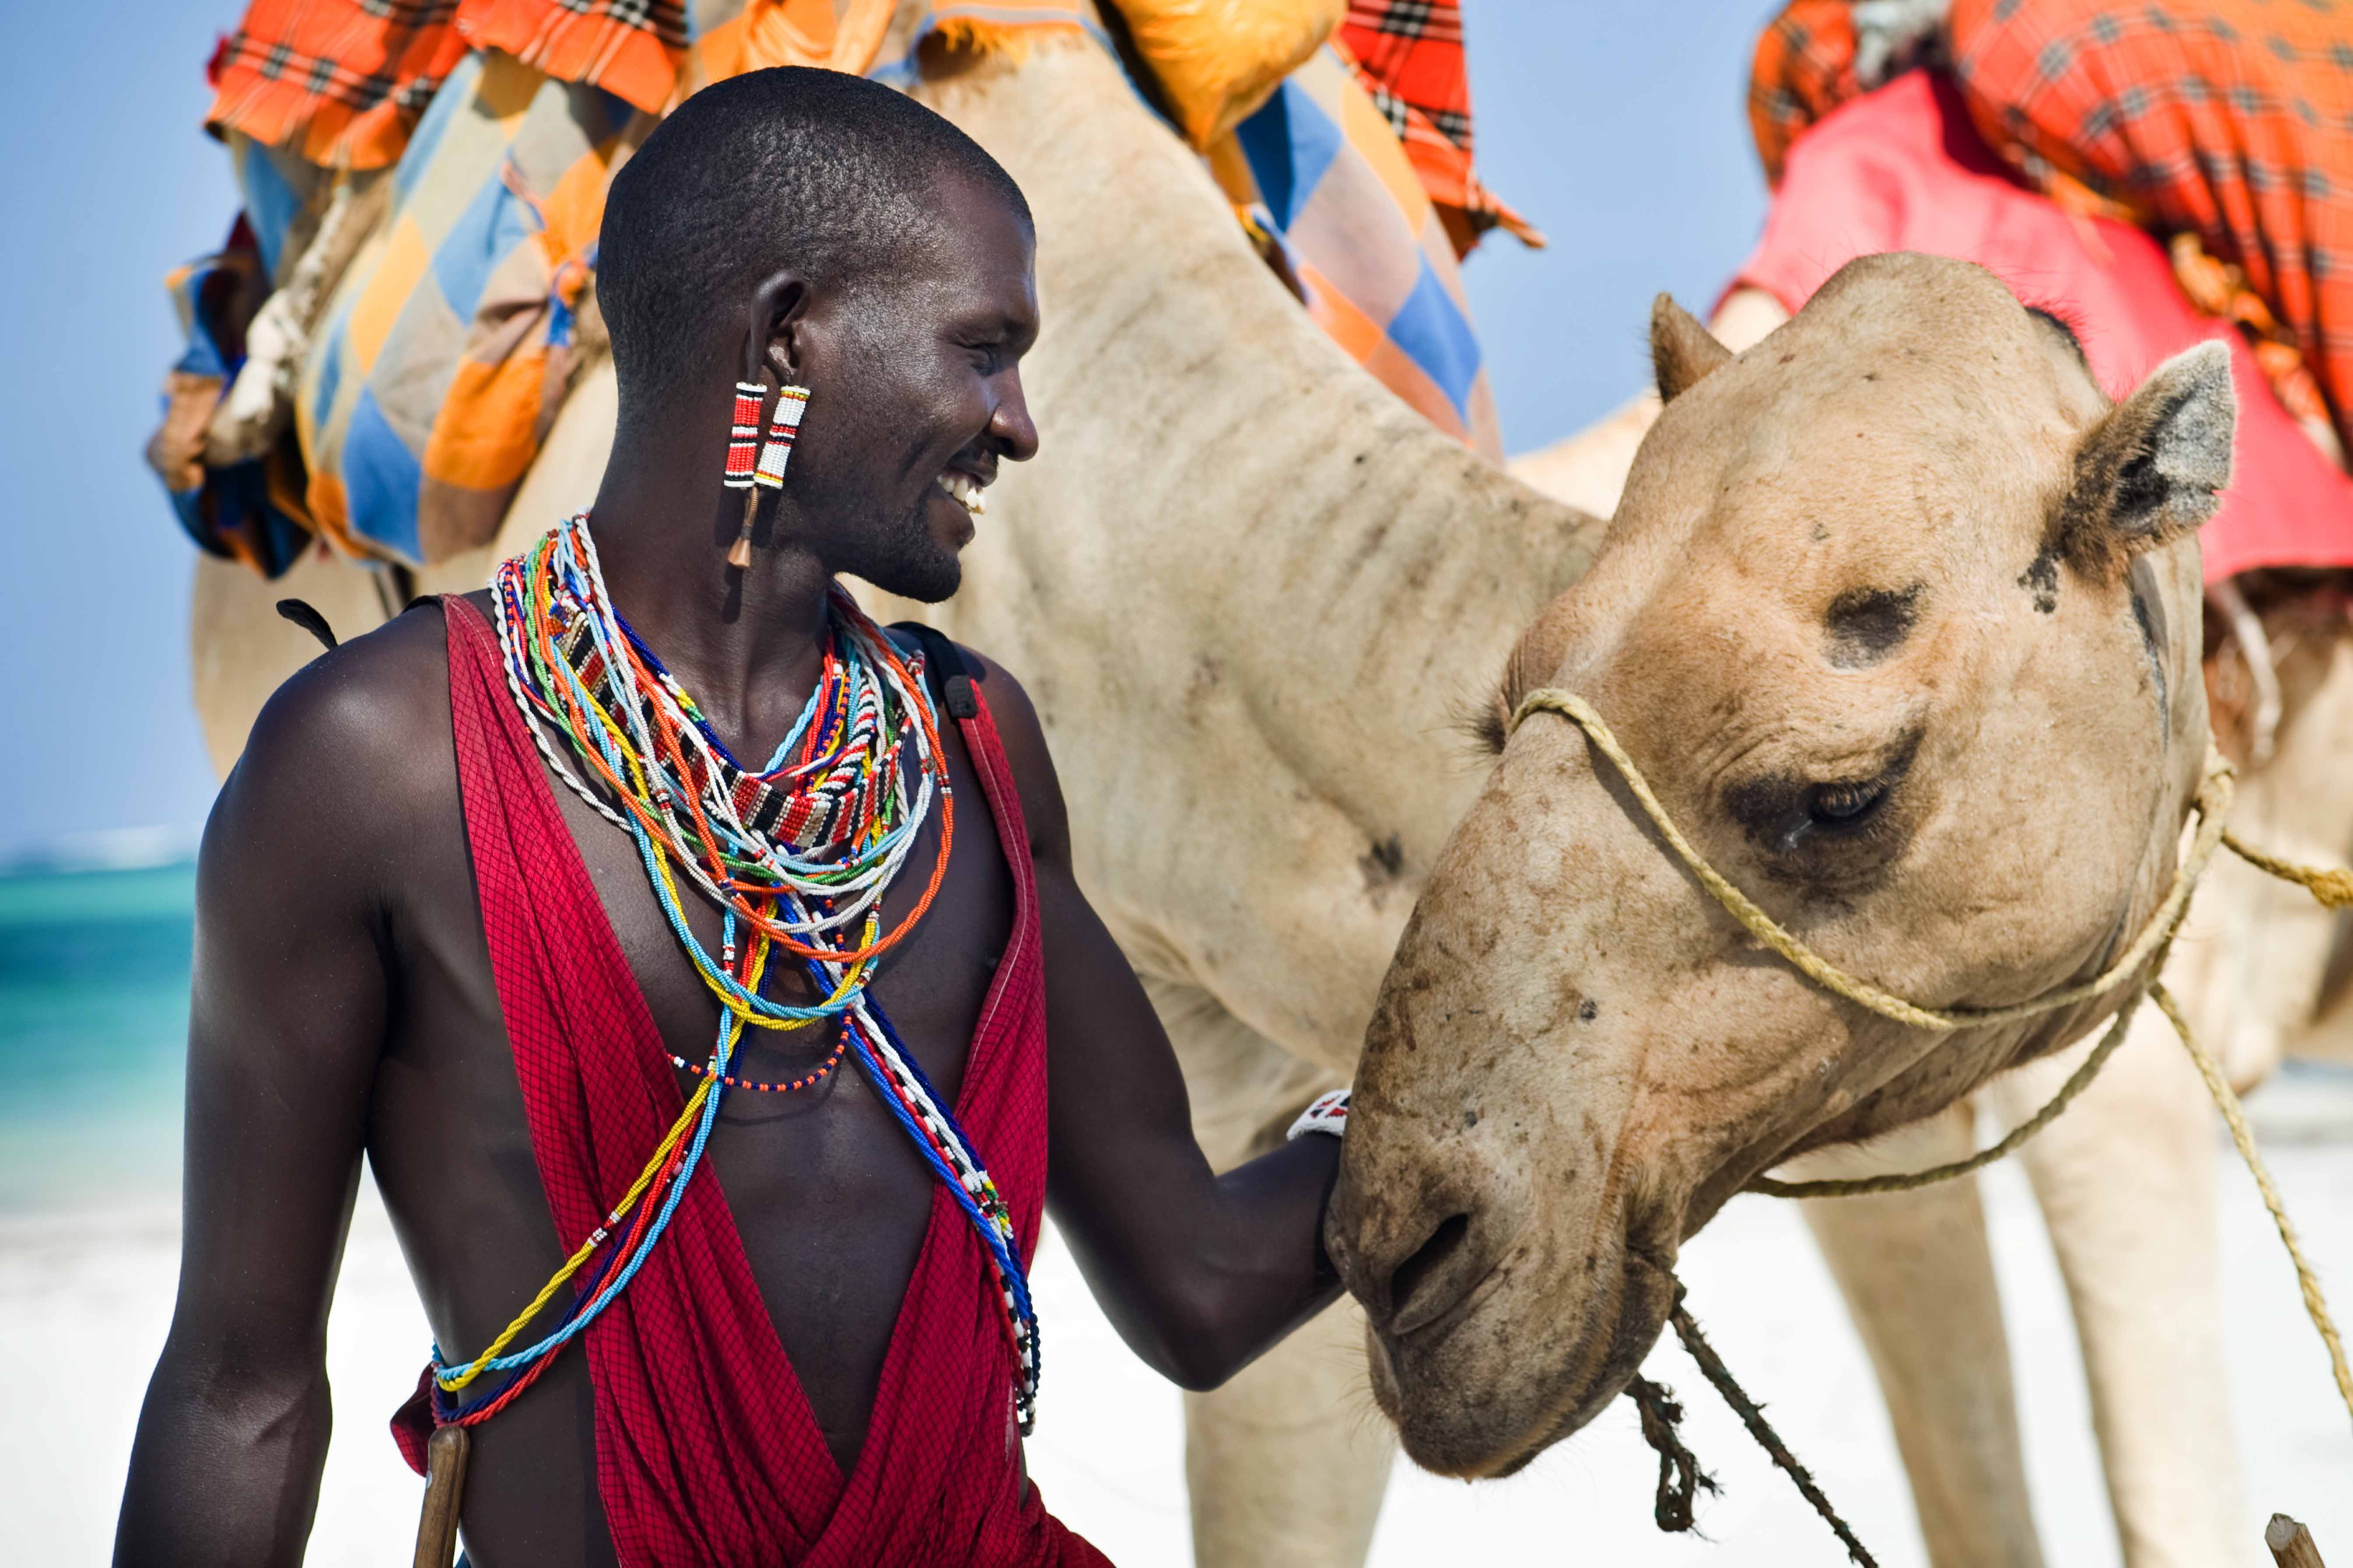 East Africa: A Life Changing Cultural Experience